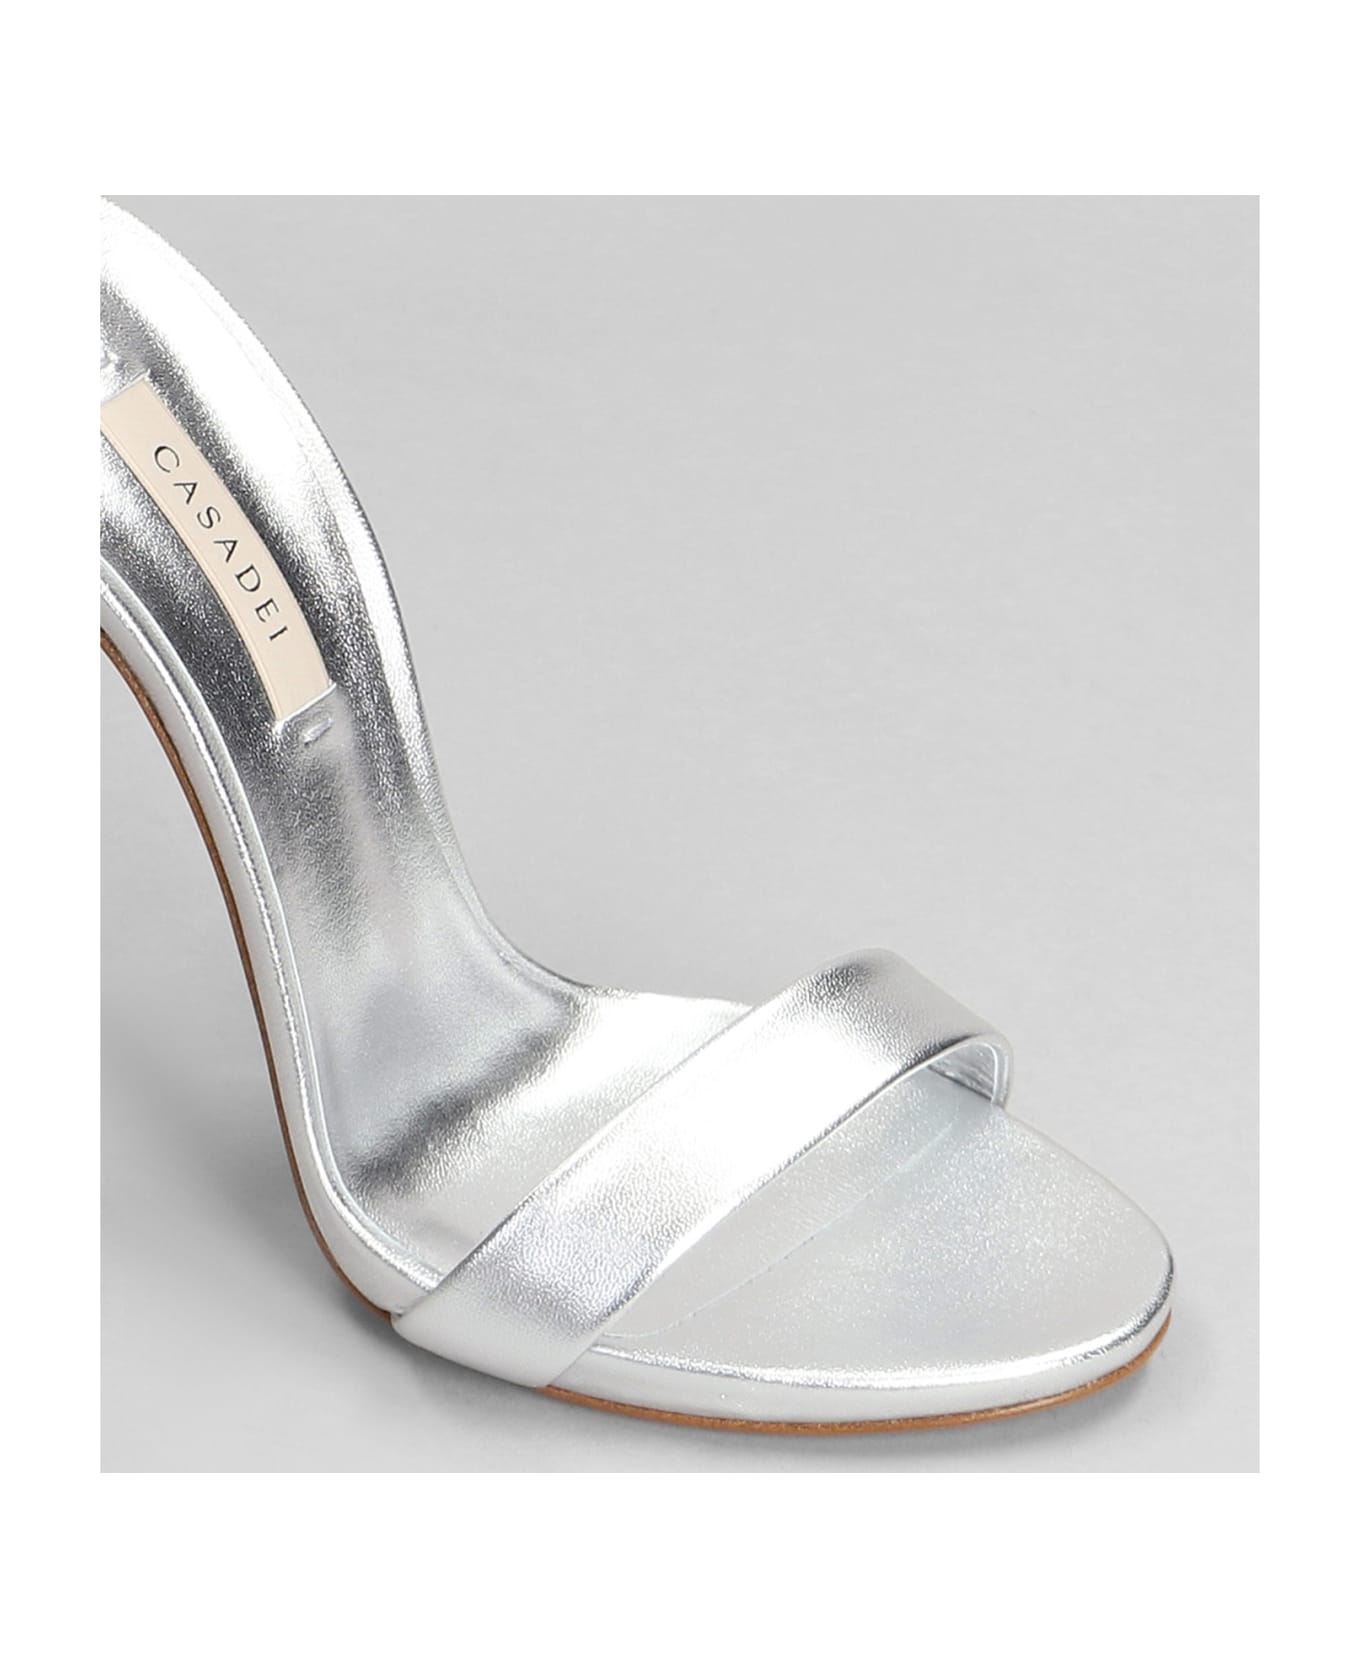 Casadei Sandals In Silver Leather - silver サンダル